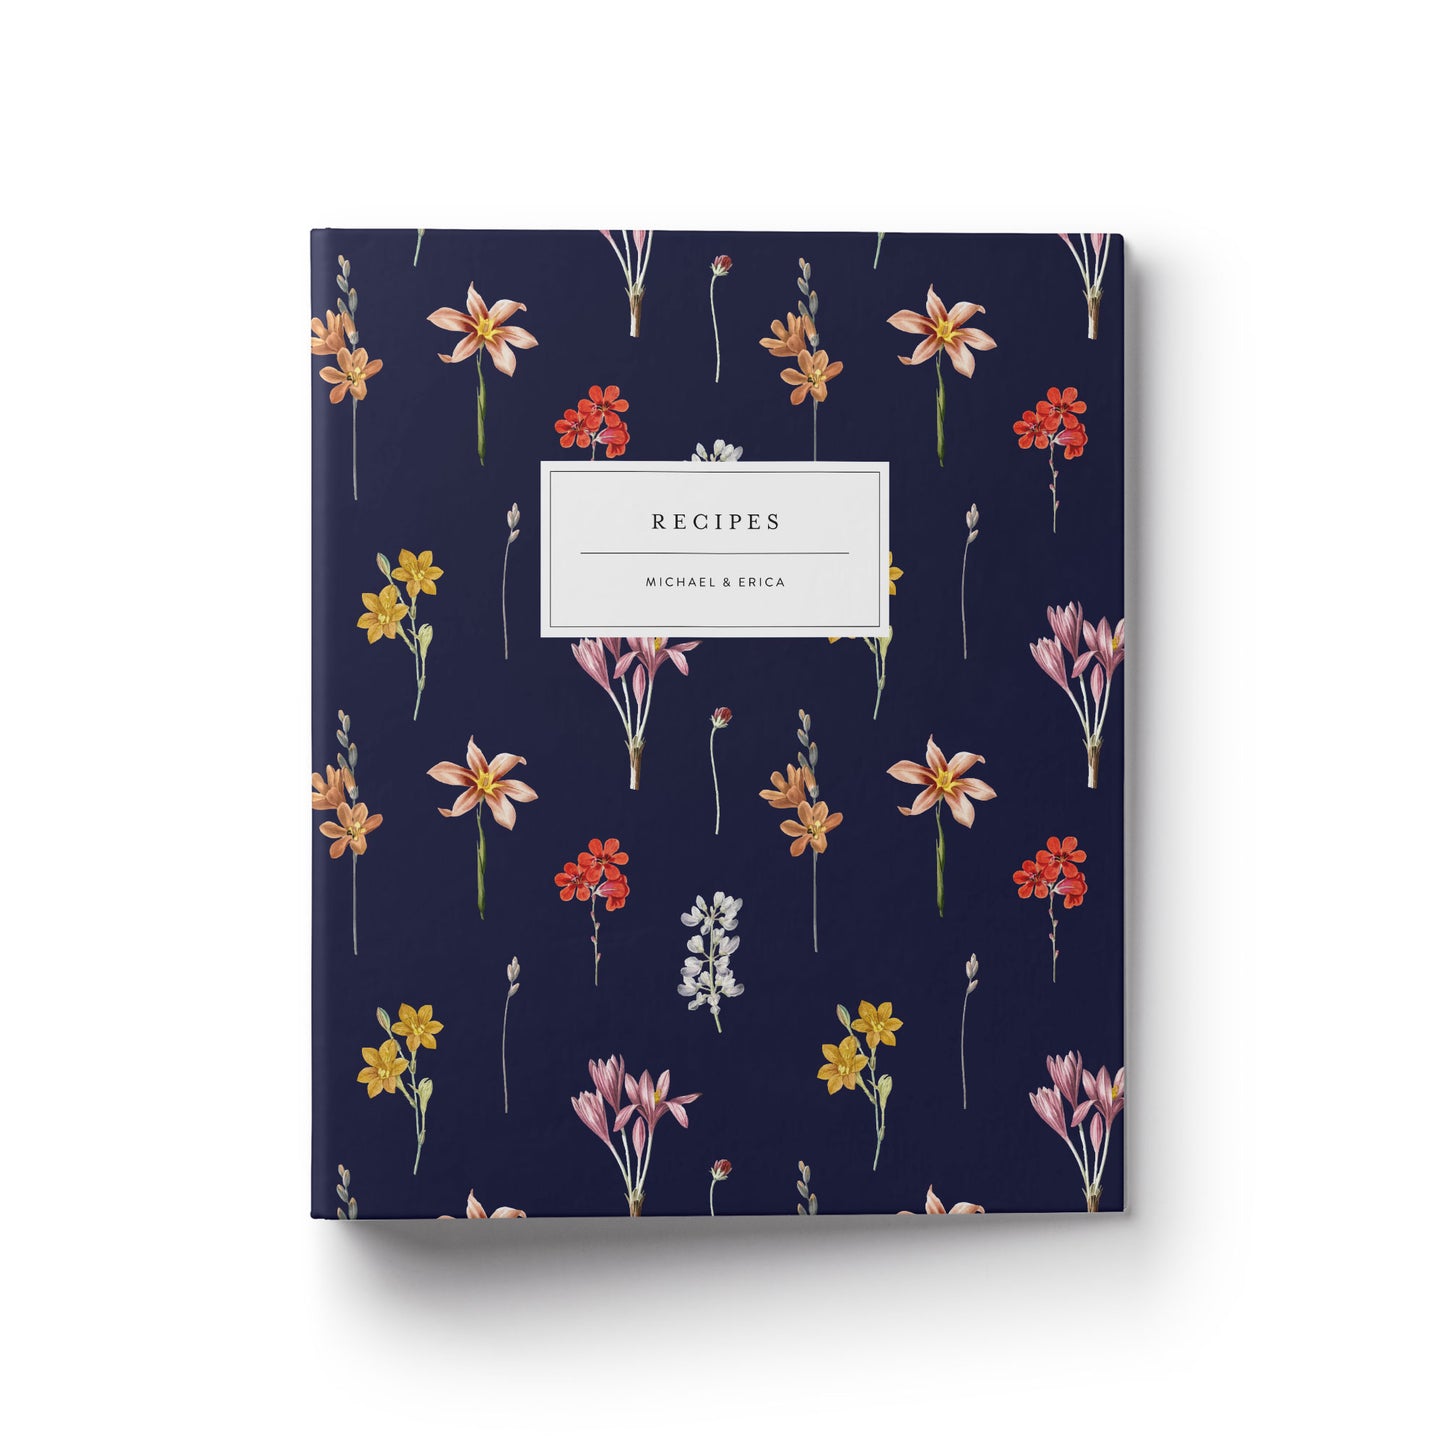 A floral print custom recipe binder makes the perfect gift for any occasion